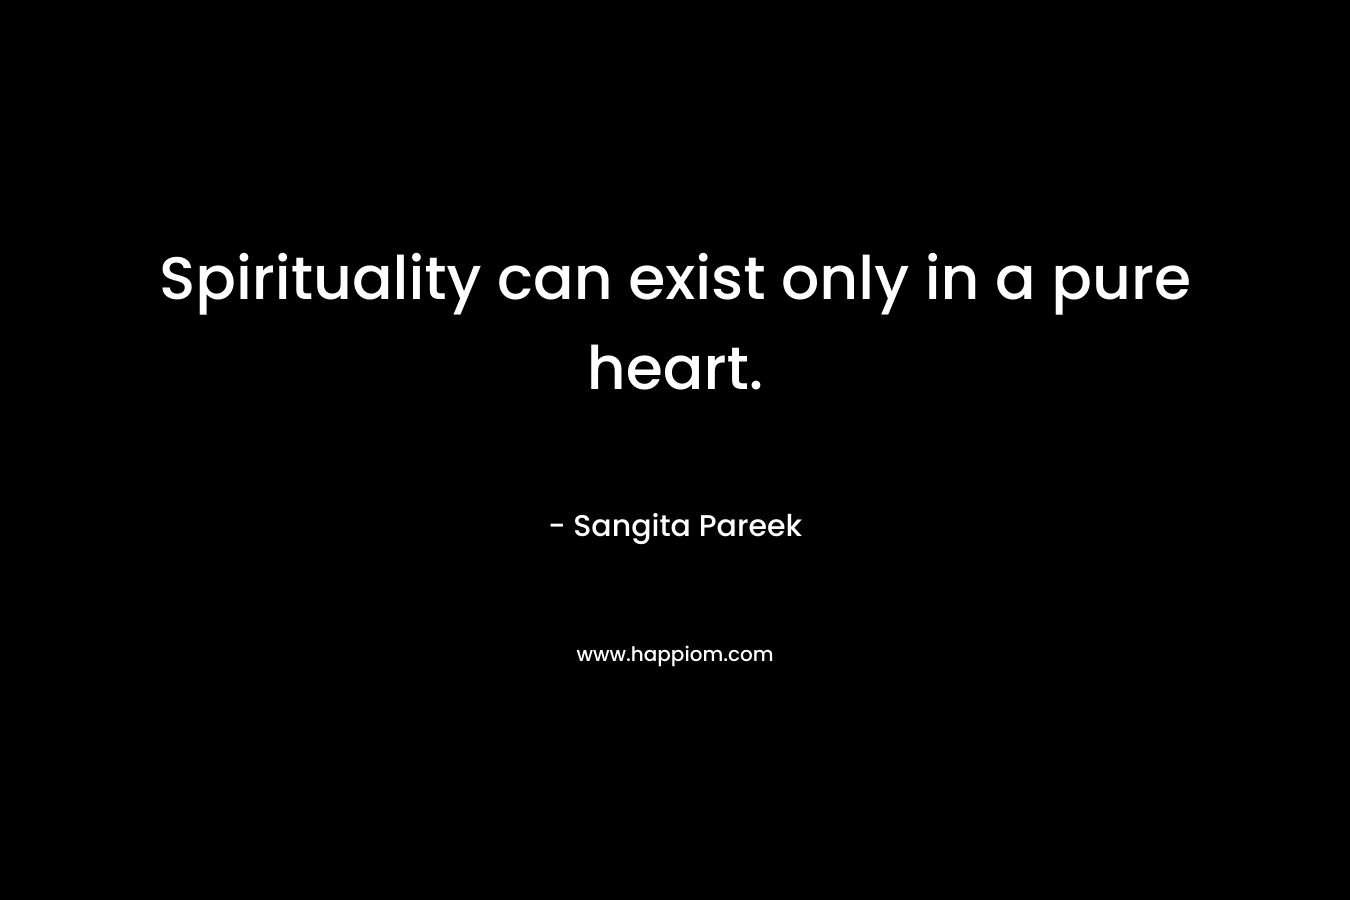 Spirituality can exist only in a pure heart. – Sangita Pareek